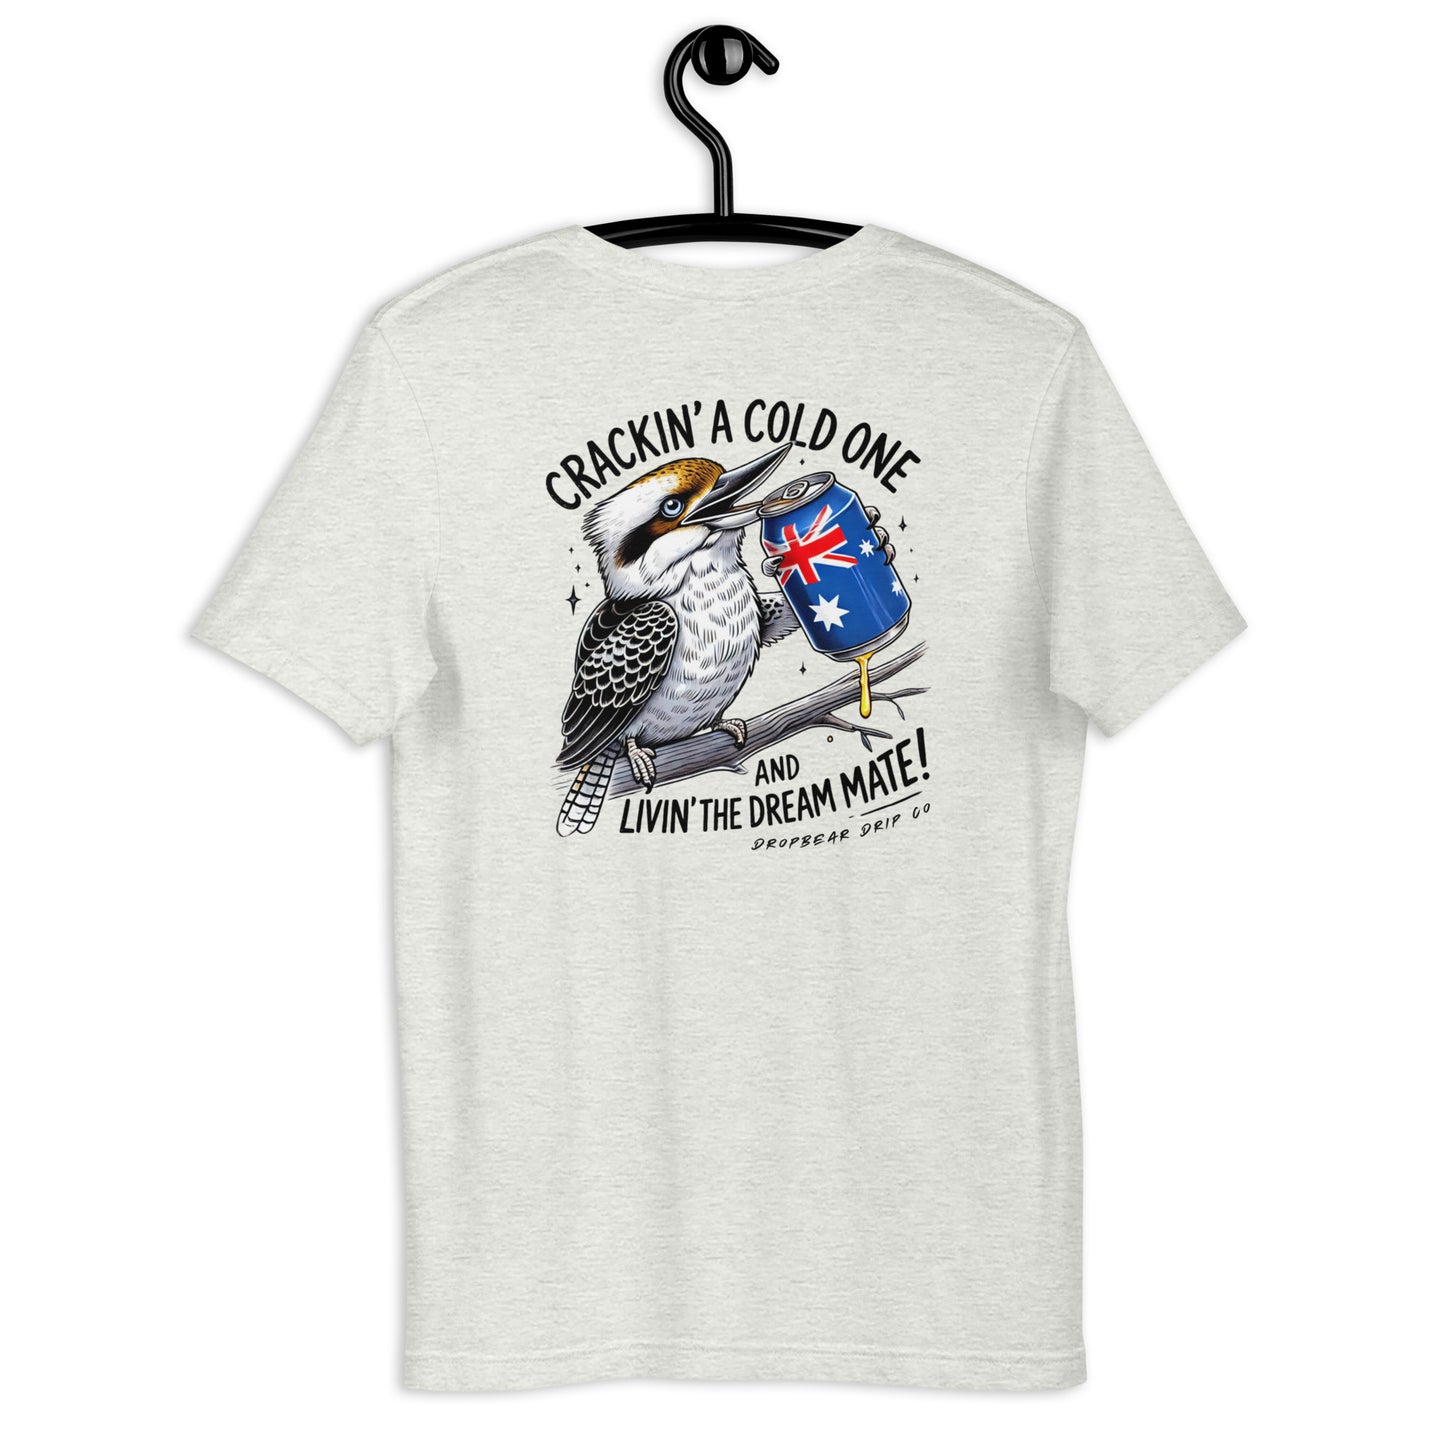 Crackin' A Cold One - Classic Cotton Tee